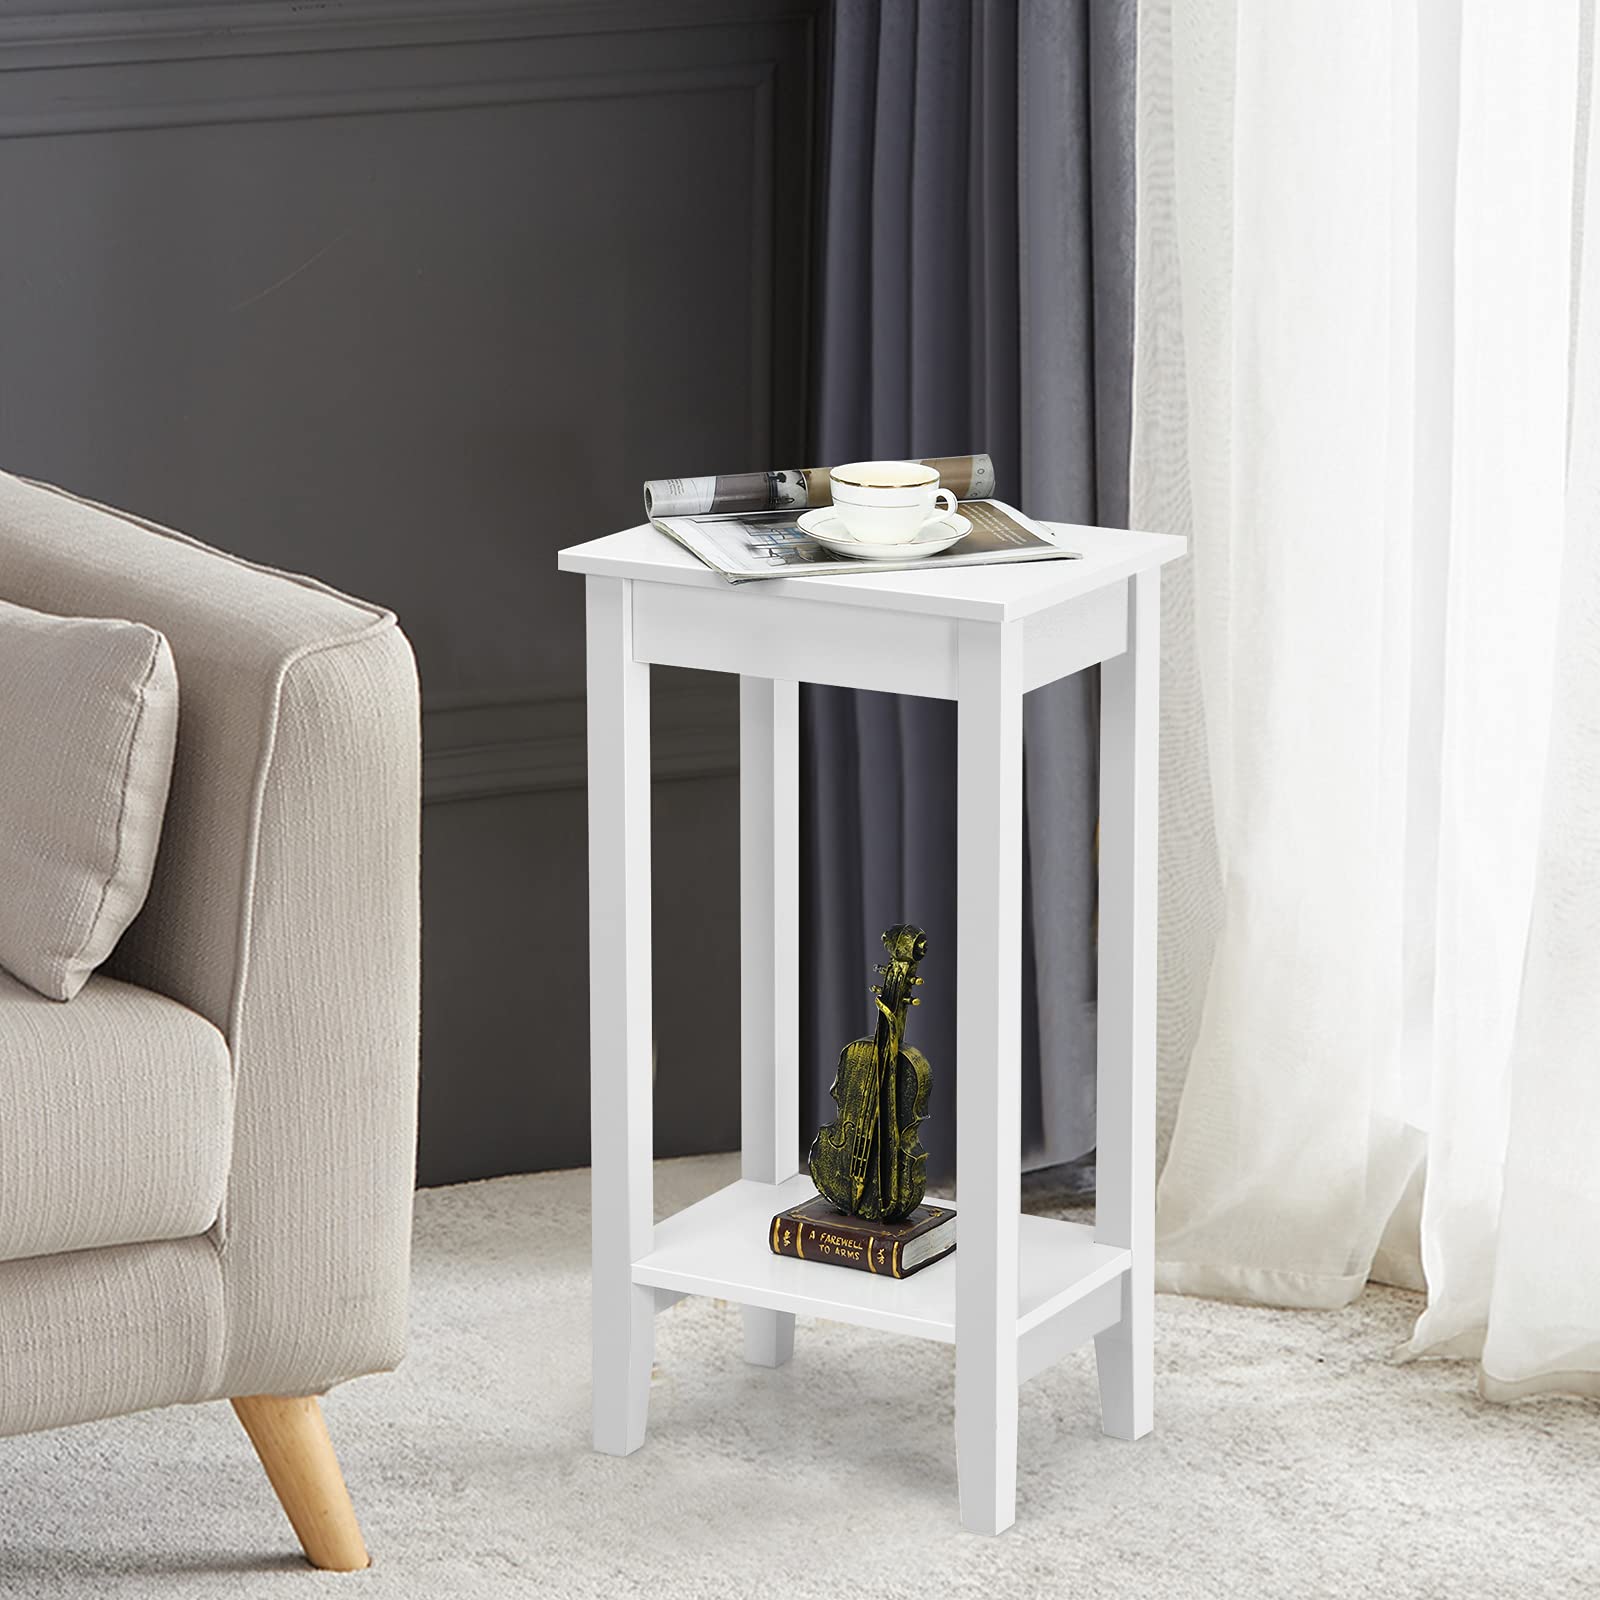 Giantex 2-Tier End Table Tall Nightstand, Simple Design Sofa Bedside Table